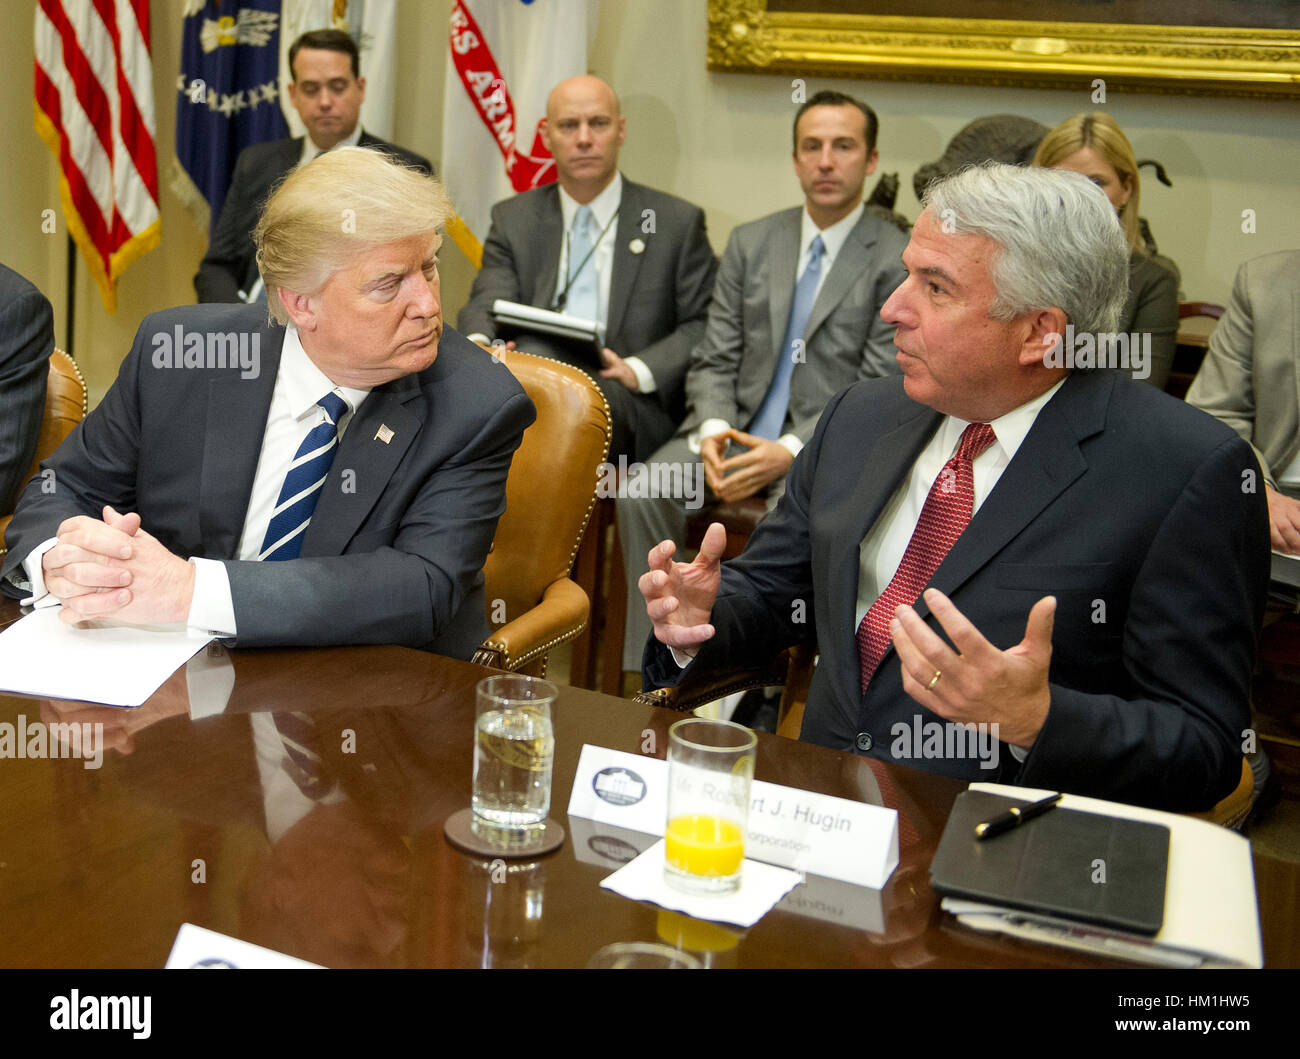 Washington DC, USA. 31st January 2017. United States President Donald Trump meets with representatives from PhRMA, the Pharmaceutical Research and Manufacturers of America in the in the Roosevelt Room of the White House in Washington, DC on Tuesday, January 31, 2017. According to its website PhRMA 'represents the country's leading biopharmaceutical researchers and biotechnology companies.' At right is Robert J. Hugin, Executive Chairman, Celgene Corporation. Credit: MediaPunch Inc/Alamy Live News Stock Photo